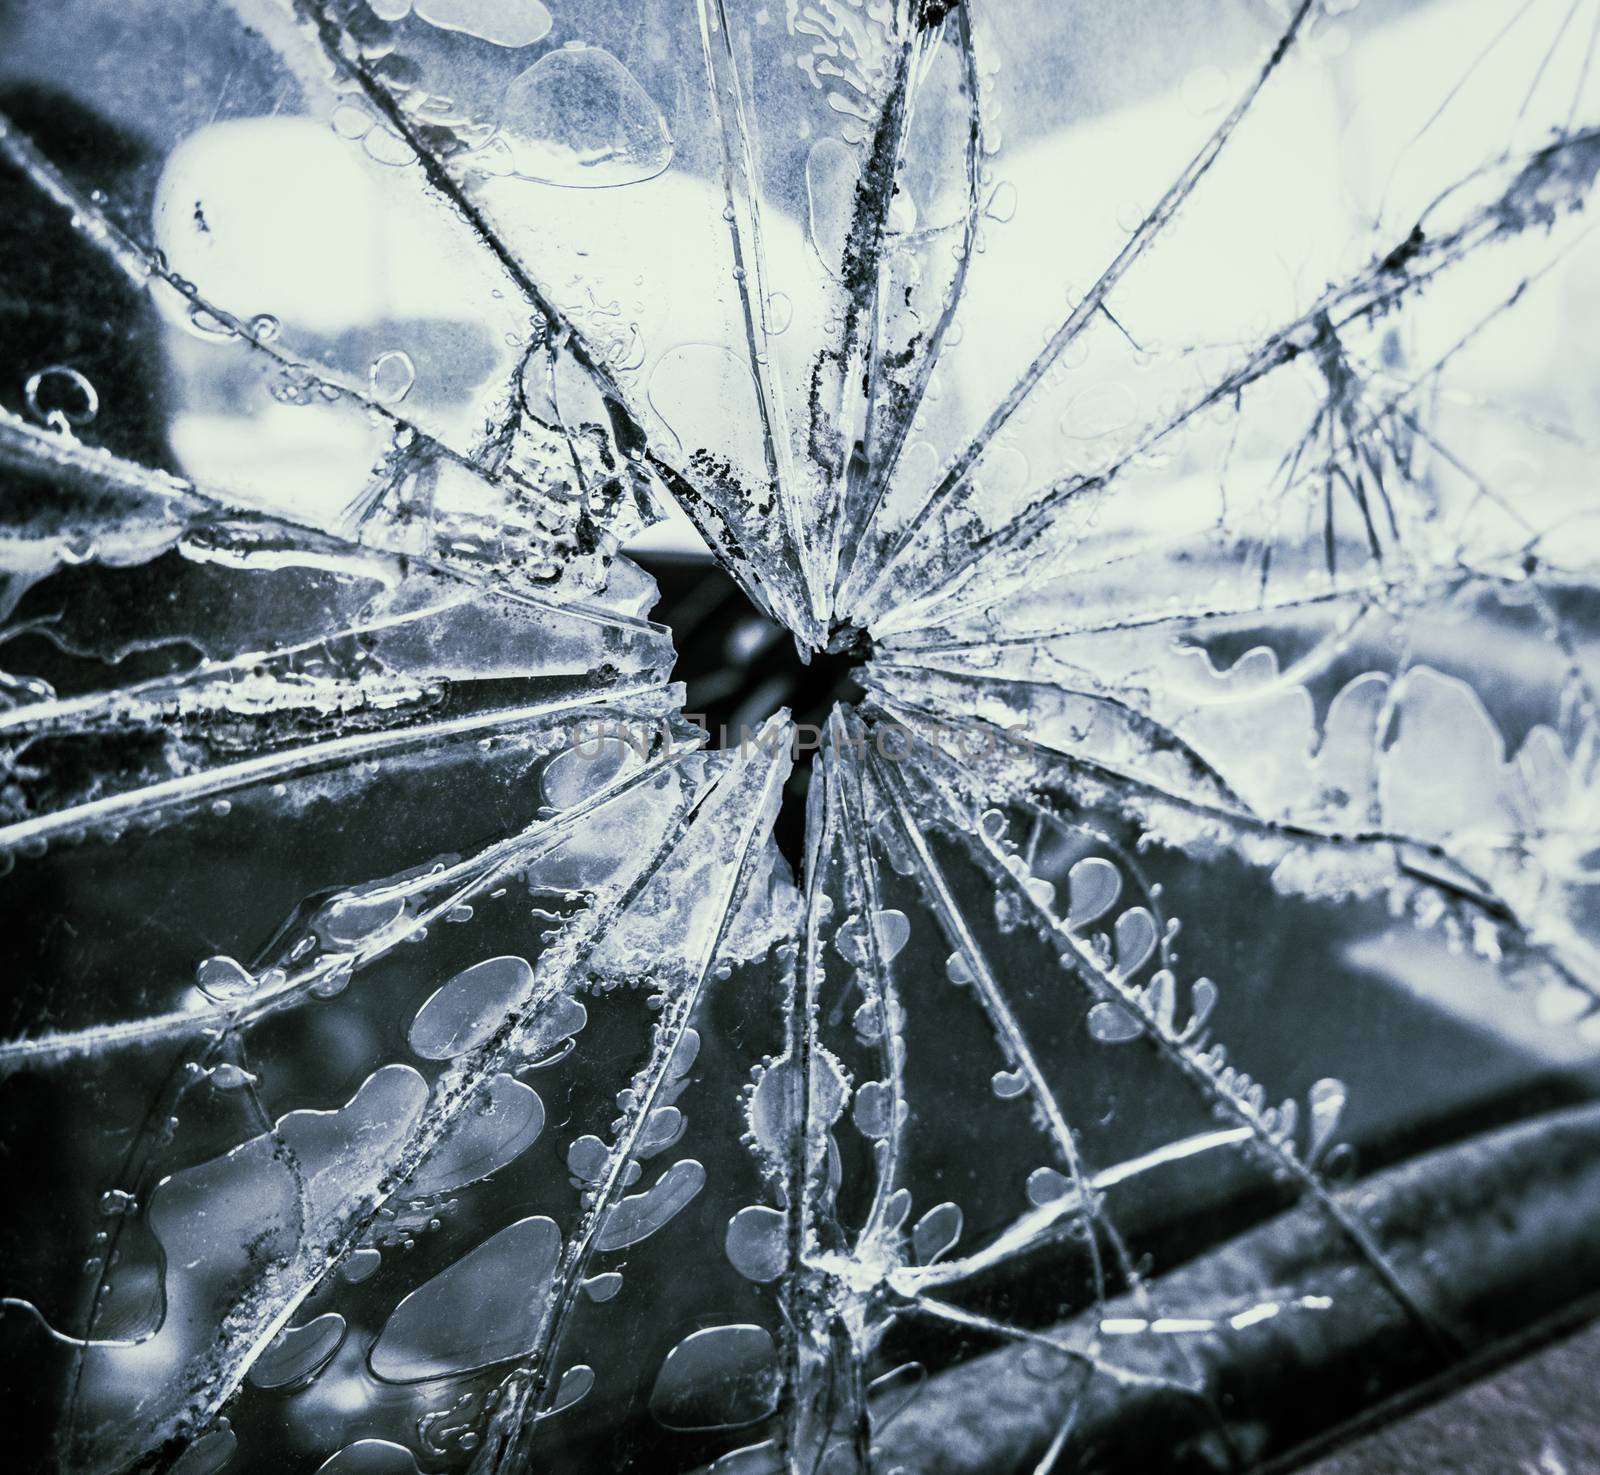 Conceptual Crime Image Of A Smashed Truck Window